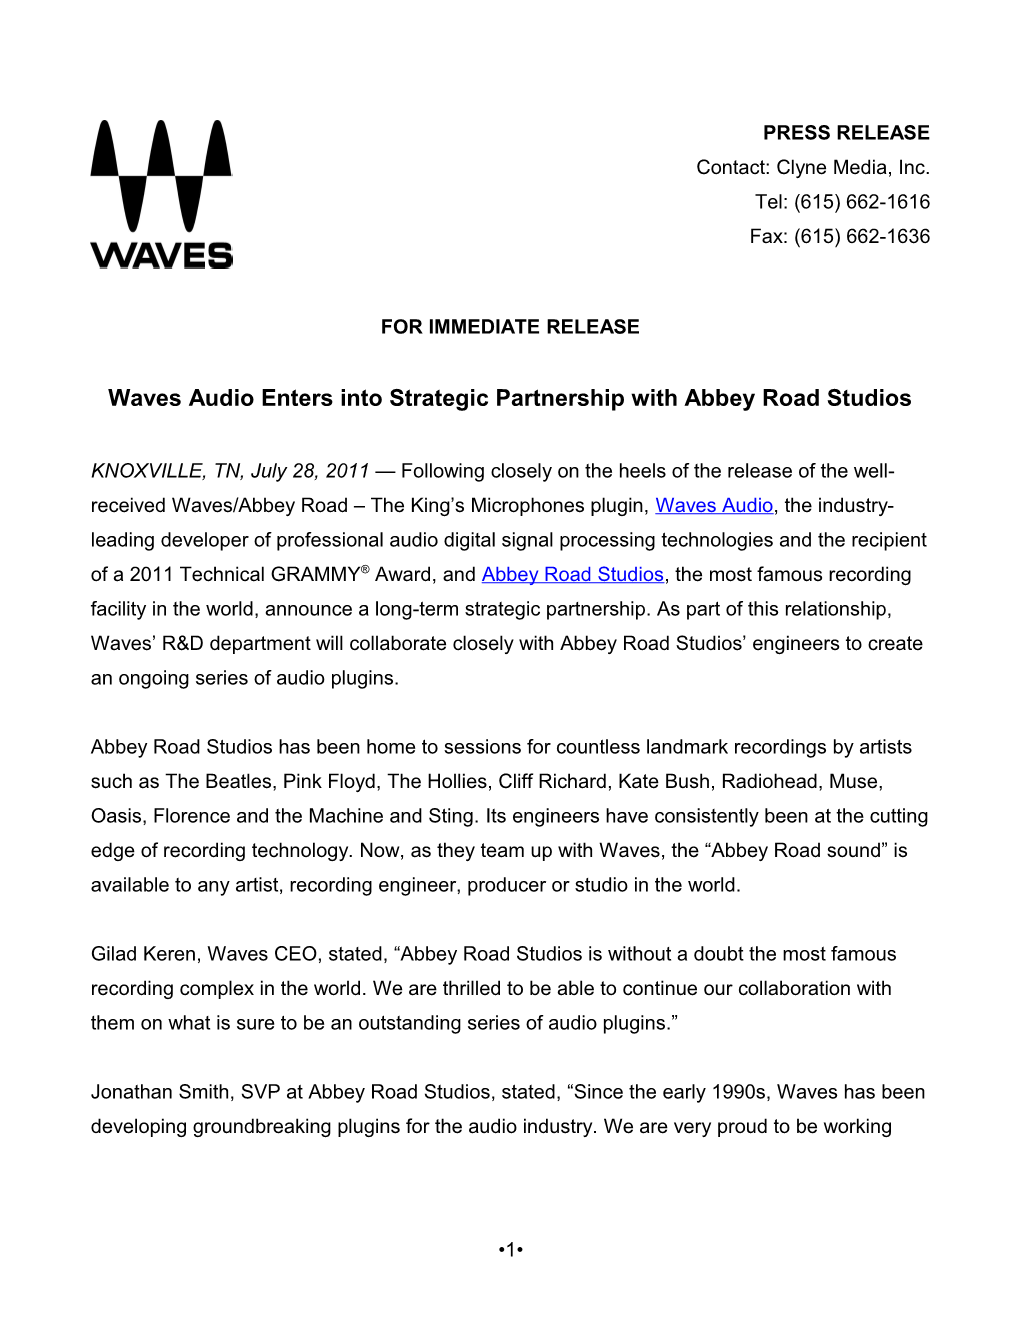 Waves Audio Enters Into Strategic Partnership with Abbey Road Studios